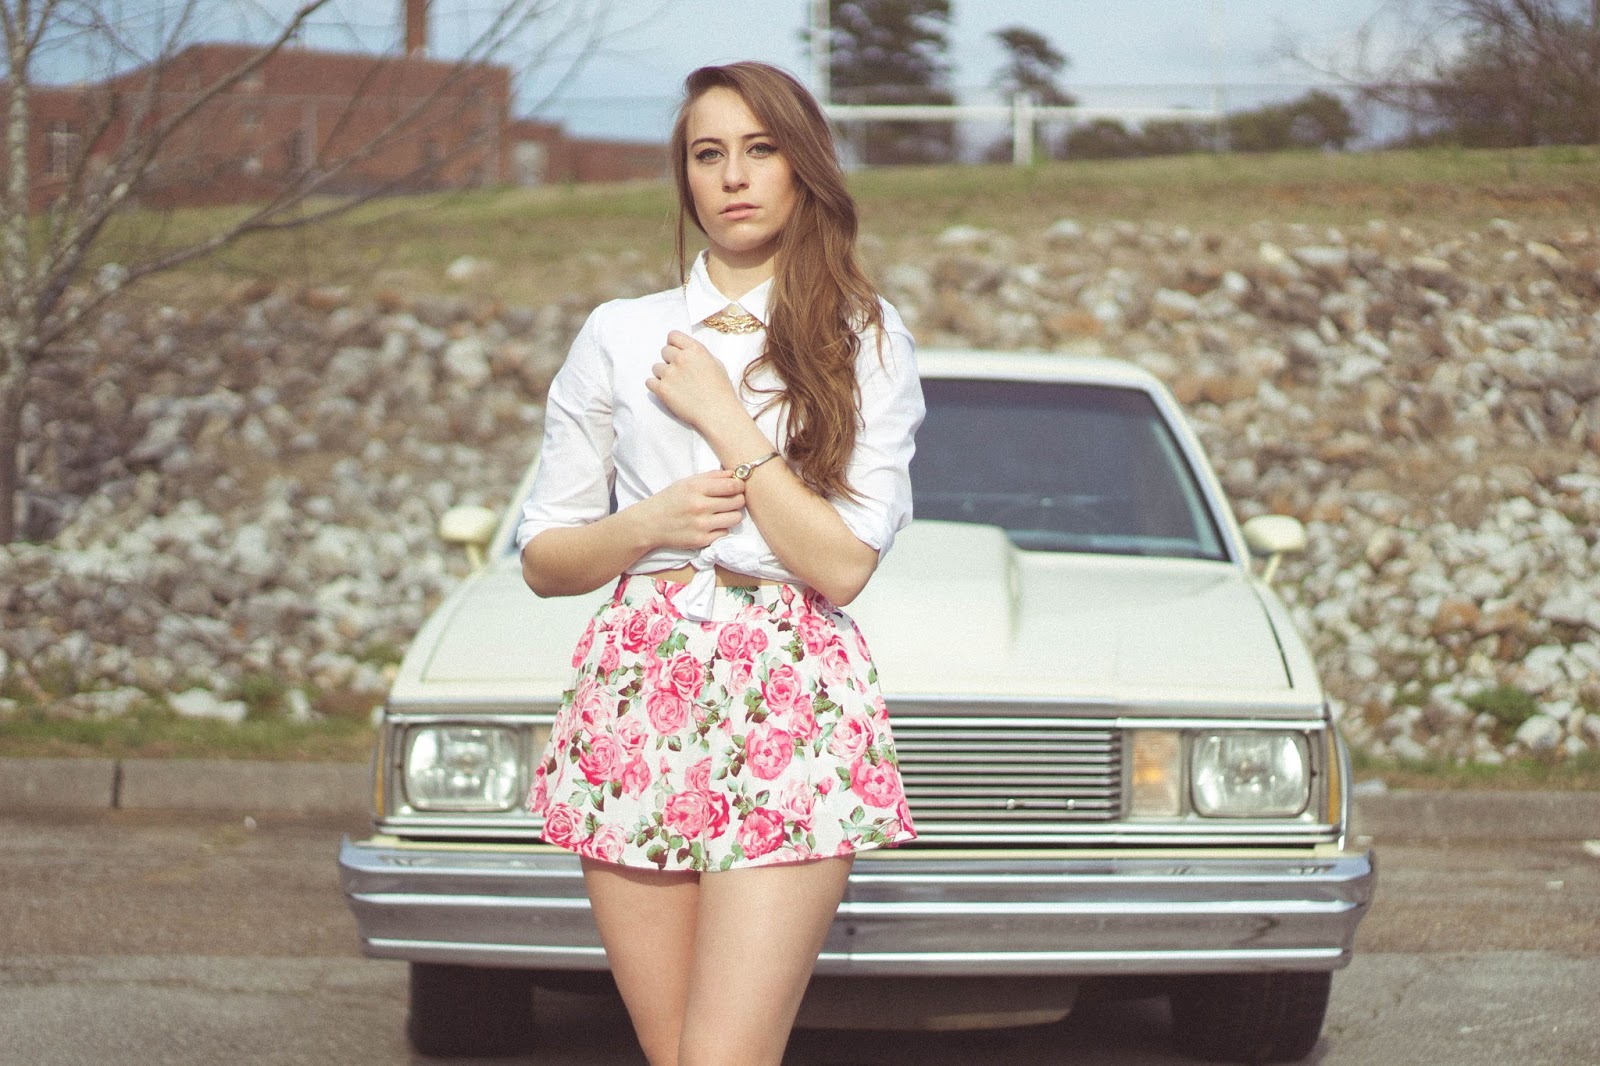 Vintage Inspired Outfit, lana del rey style, retro style, outfit, fashion blogger, feminine, femme fatale,forever 21 floral skort, gap white button up, el camino